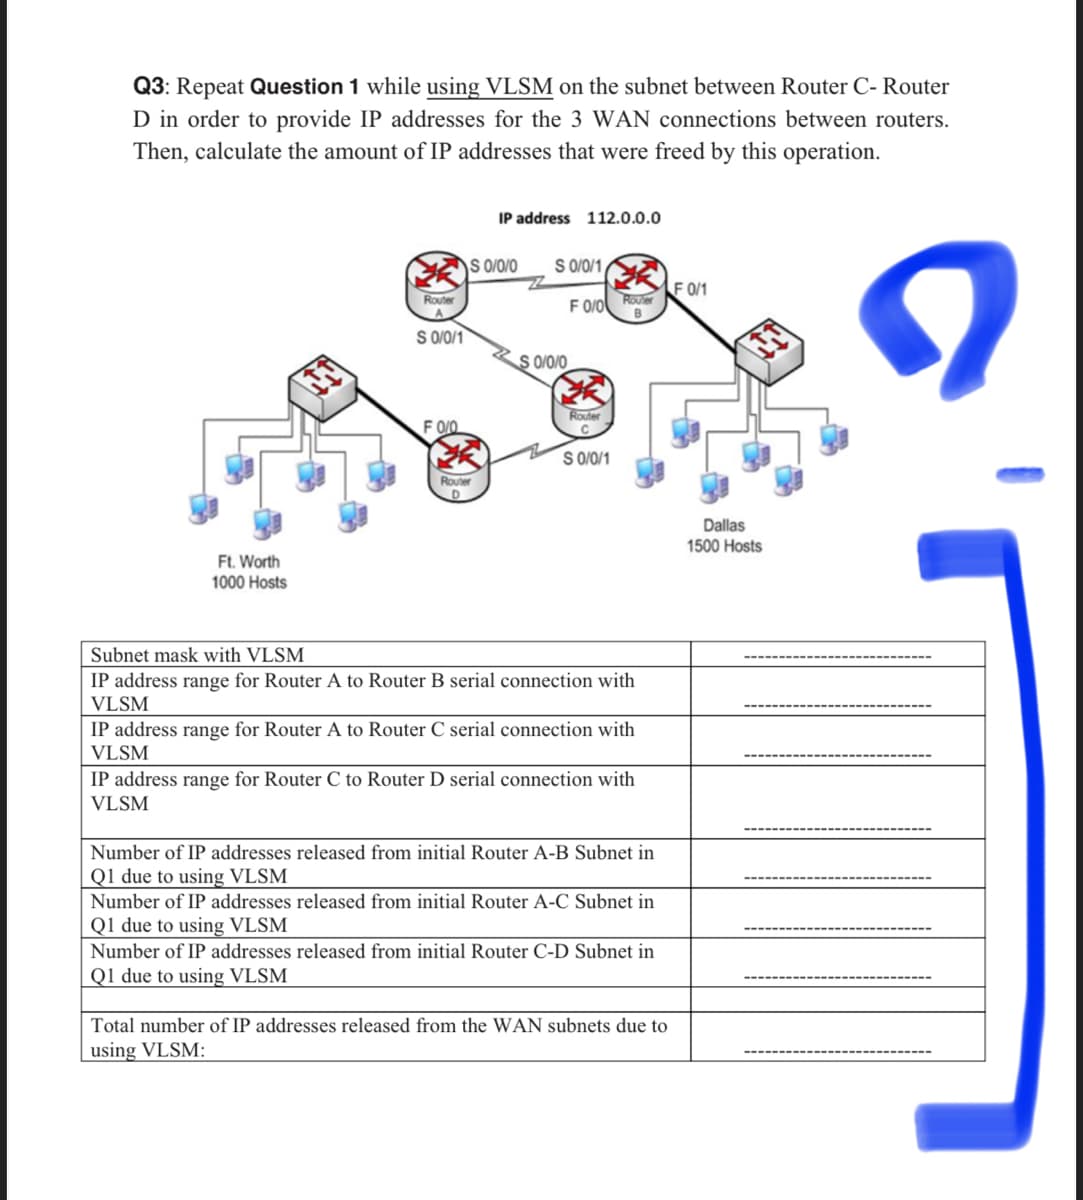 Q3: Repeat Question 1 while using VLSM on the subnet between Router C- Router
D in order to provide IP addresses for the 3 WAN connections between routers.
Then, calculate the amount of IP addresses that were freed by this operation.
TT
Ft. Worth
1000 Hosts
Router
S 0/0/1
FO/0
S 0/0/0
K
IP address 112.0.0.0
Router
D
S 0/0/1
S 0/0/0
FO/0 Rouer
Router
S 0/0/1
Subnet mask with VLSM
IP address range for Router A to Router B serial connection with
VLSM
IP address range for Router A to Router C serial connection with
VLSM
IP address range for Router C to Router D serial connection with
VLSM
Number of IP addresses released from initial Router A-B Subnet in
Q1 due to using VLSM
Number of IP addresses released from initial Router A-C Subnet in
Q1 due to using VLSM
Number of IP addresses released from initial Router C-D Subnet in
Q1 due to using VLSM
Total number of IP addresses released from the WAN subnets due to
using VLSM:
F 0/1
Dallas
1500 Hosts